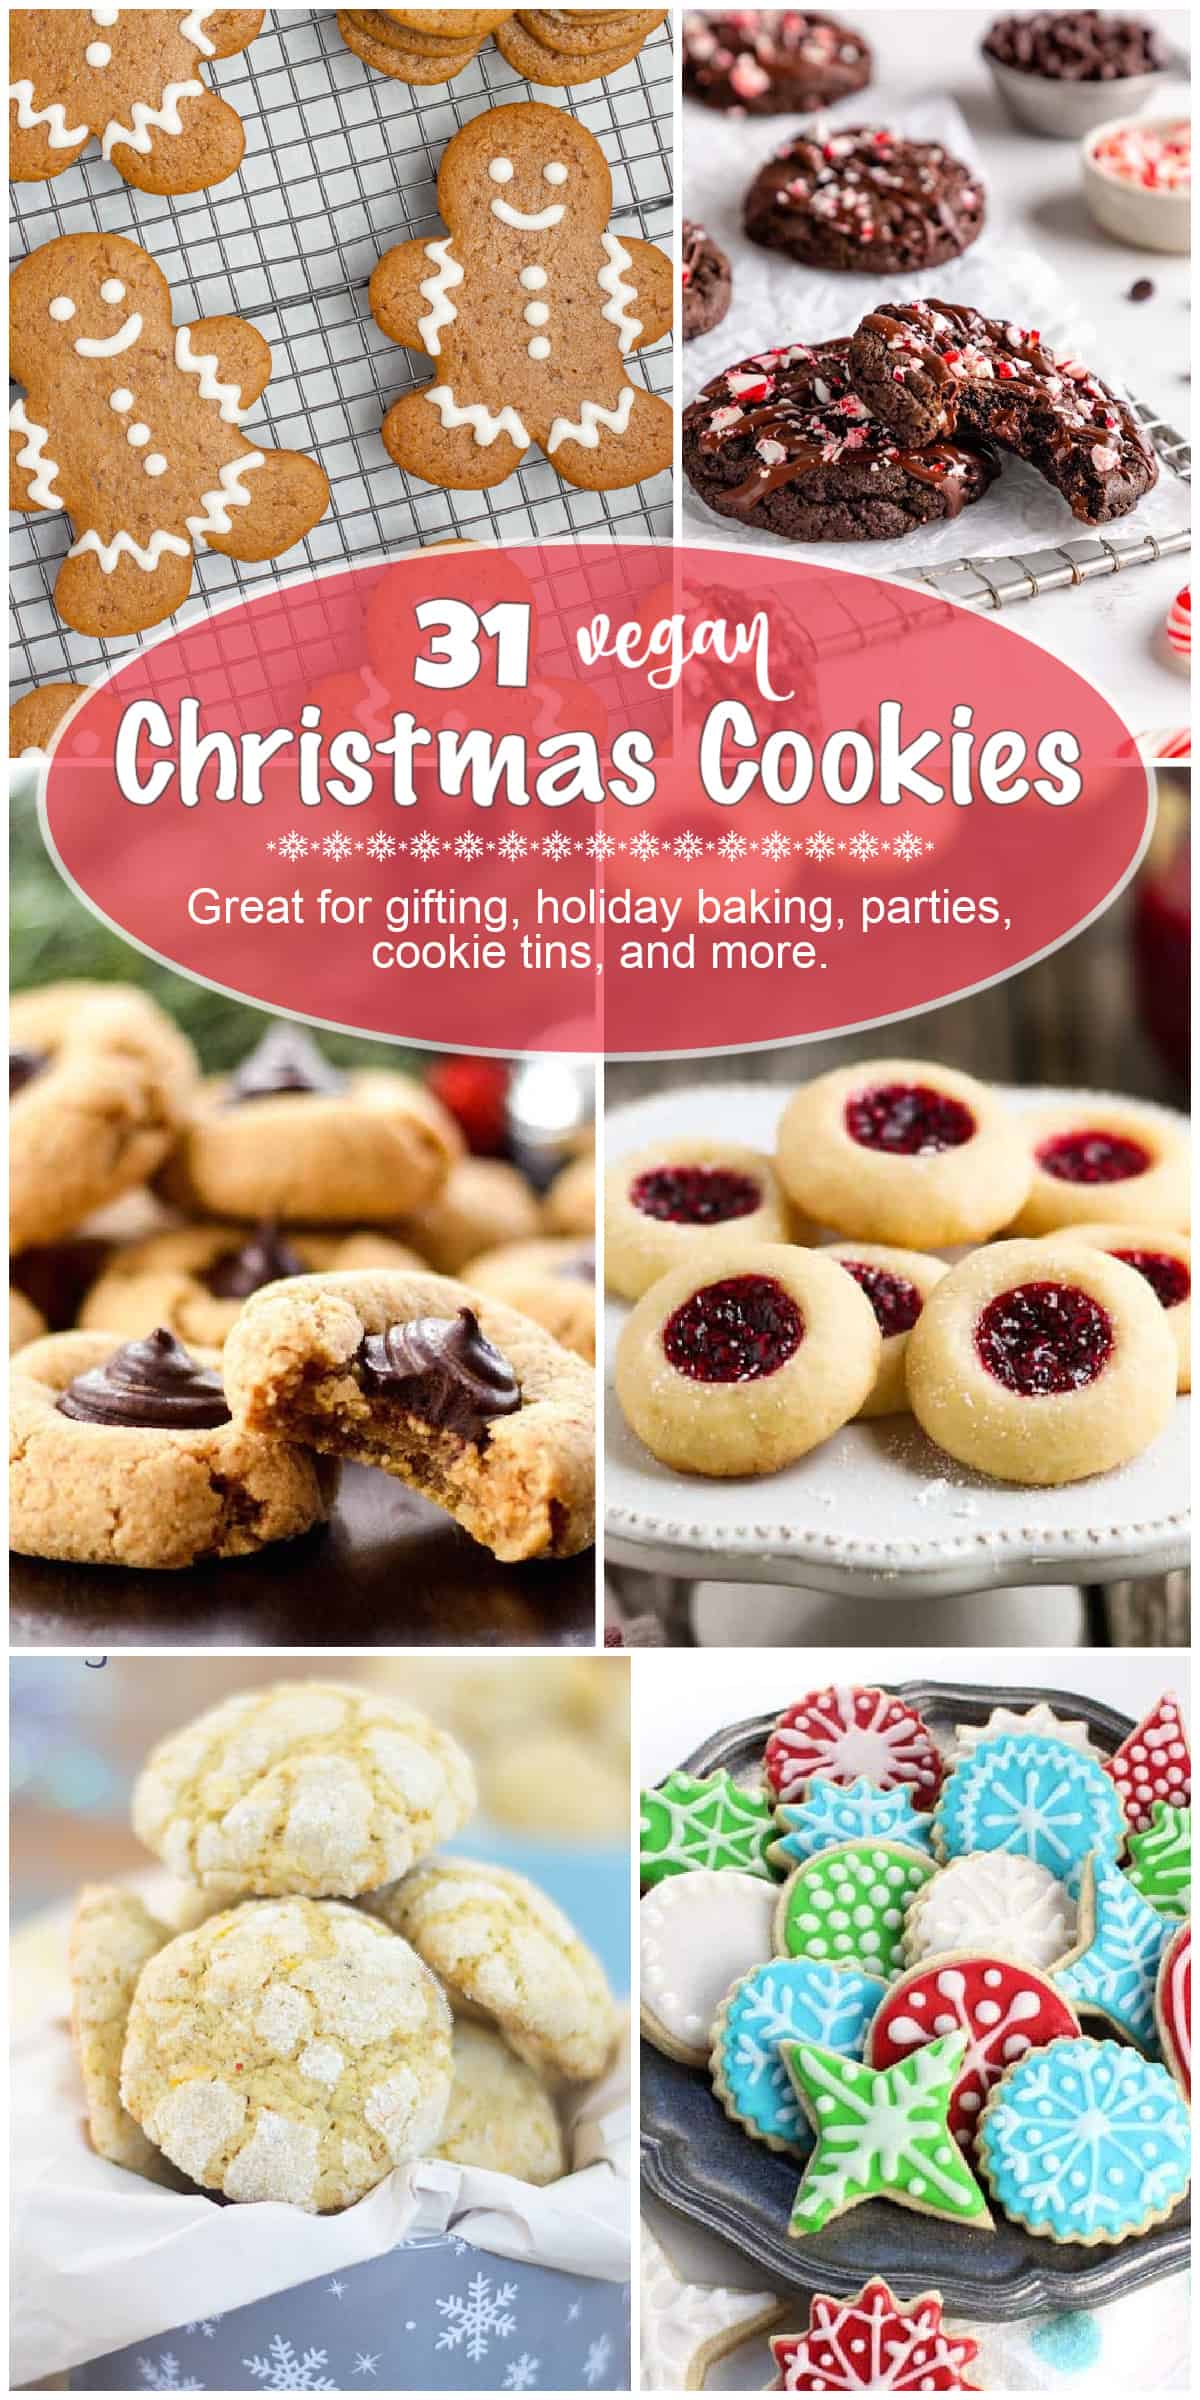 A collage of vegan Christmas cookies including decorated sugar cookies, gingerbread cookies, thumbprint cookies, and chocolate candy cane cookies.